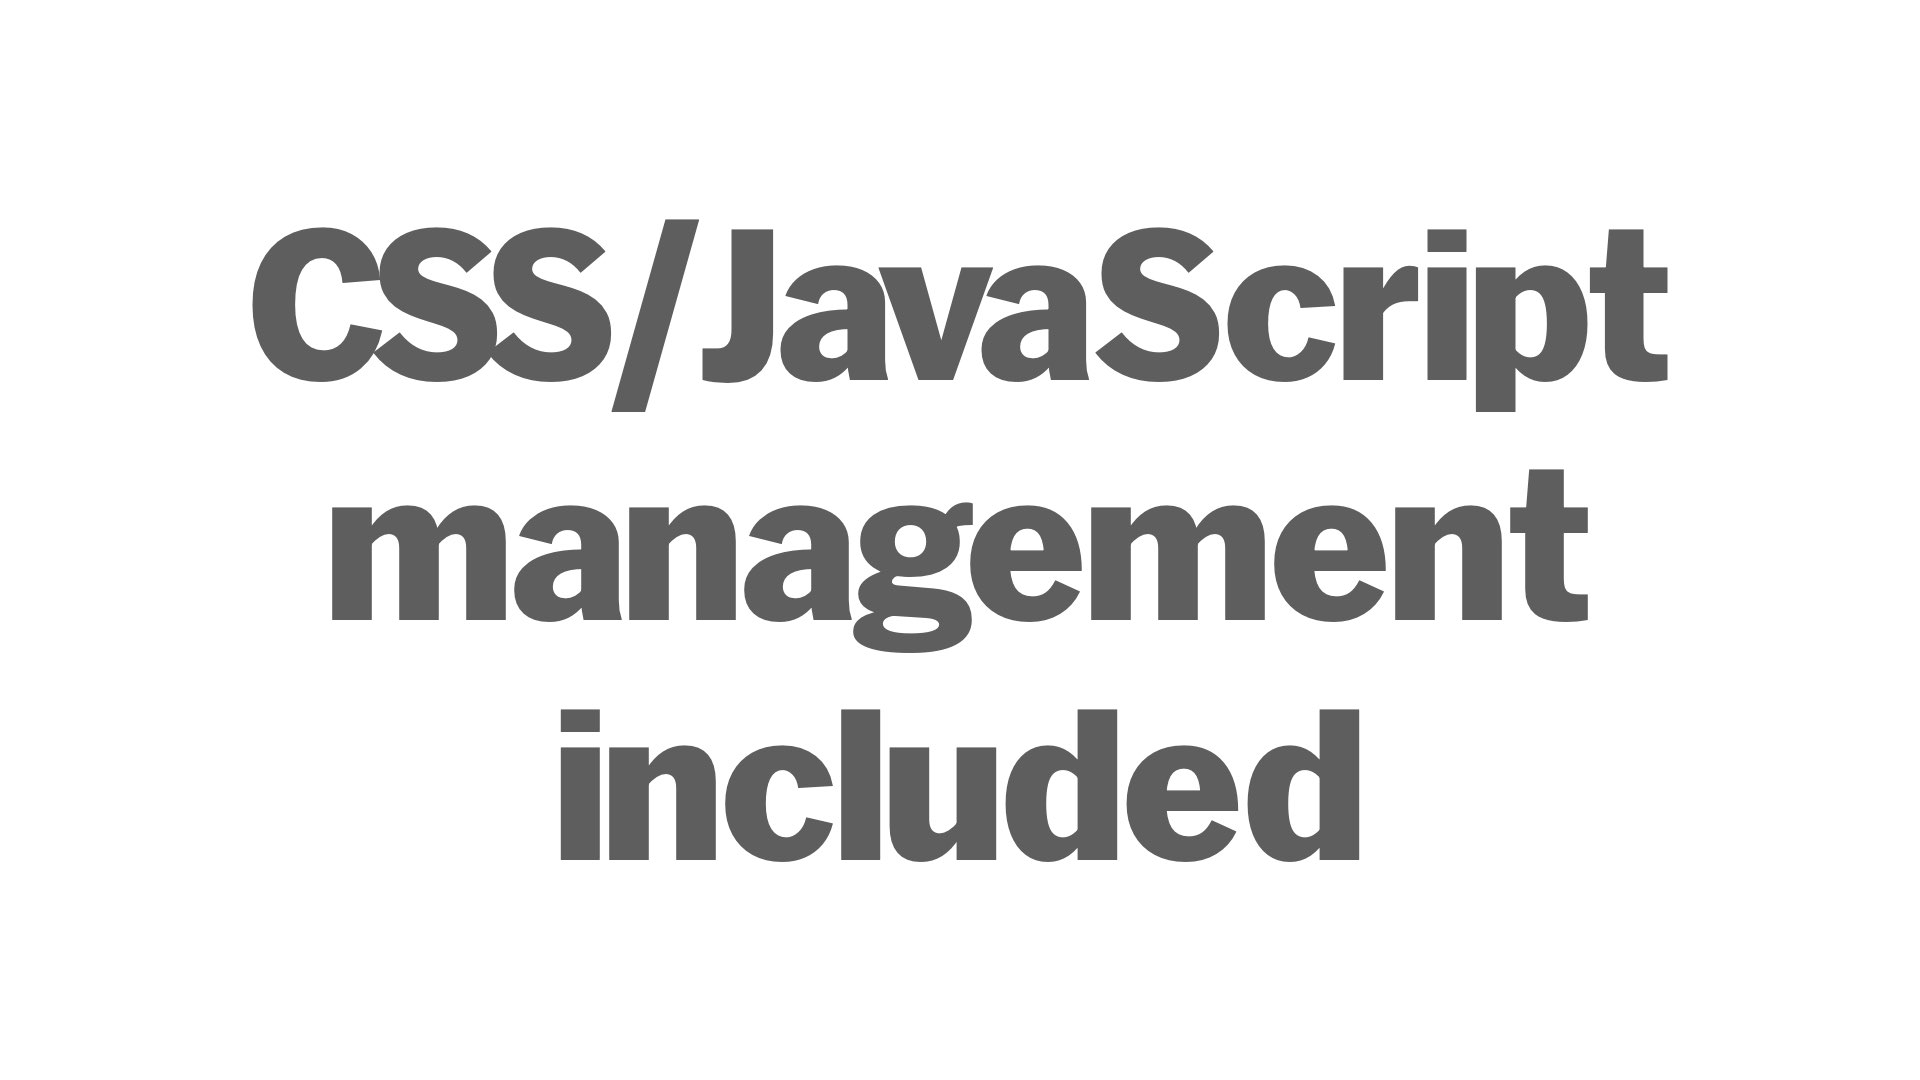 CSS/JS management included